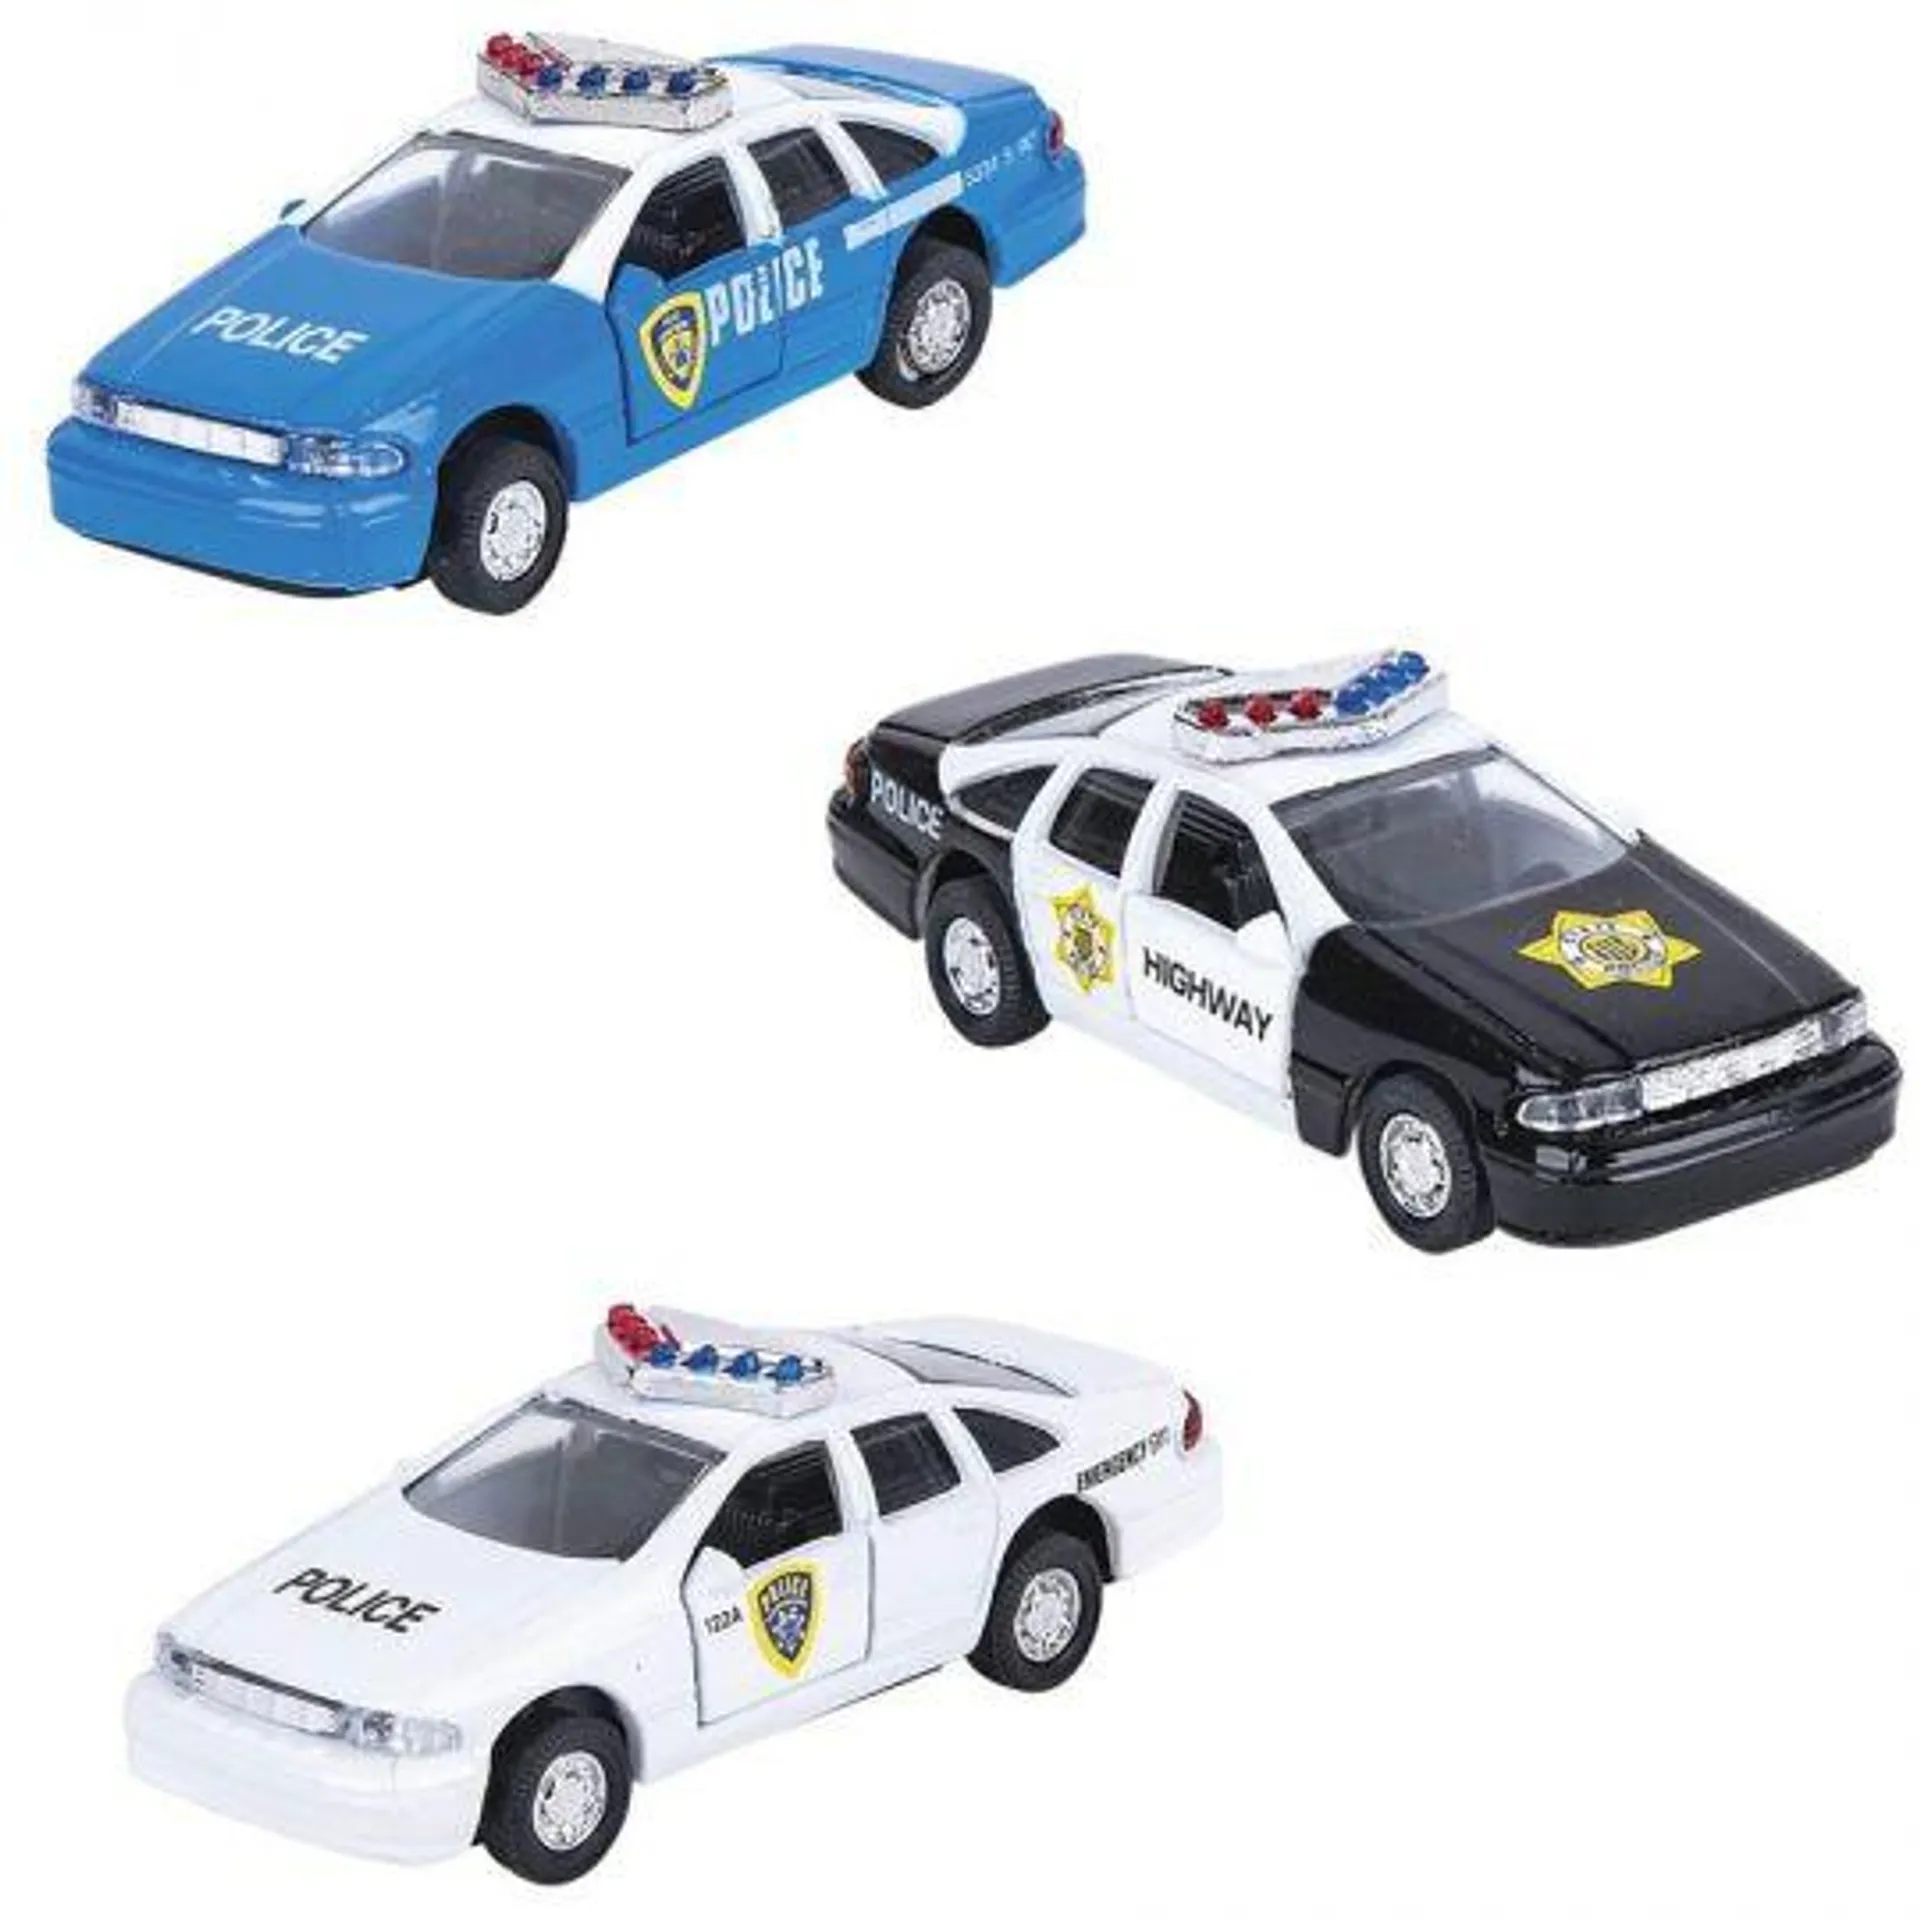 RI Novelty - Pull Back Die-Cast Metal Vehicles - SET OF 3 POLICE CARS (Black, White & Blue)(4.5 inch